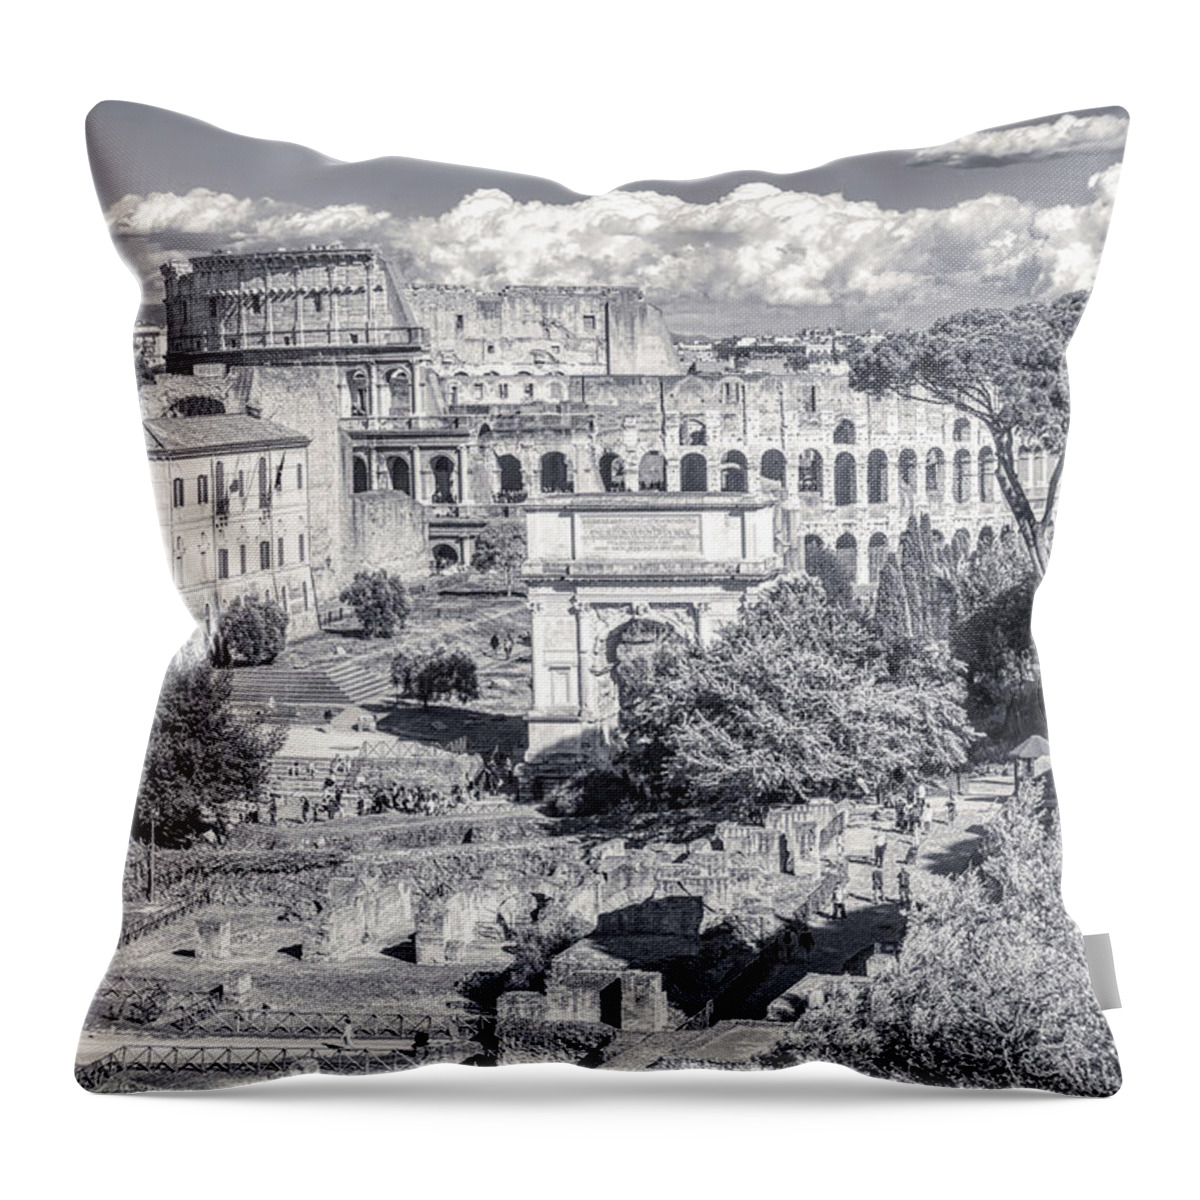 Italian Scene Throw Pillow featuring the photograph Forum Romanum with The Colosseum in the background BW by Stefano Senise